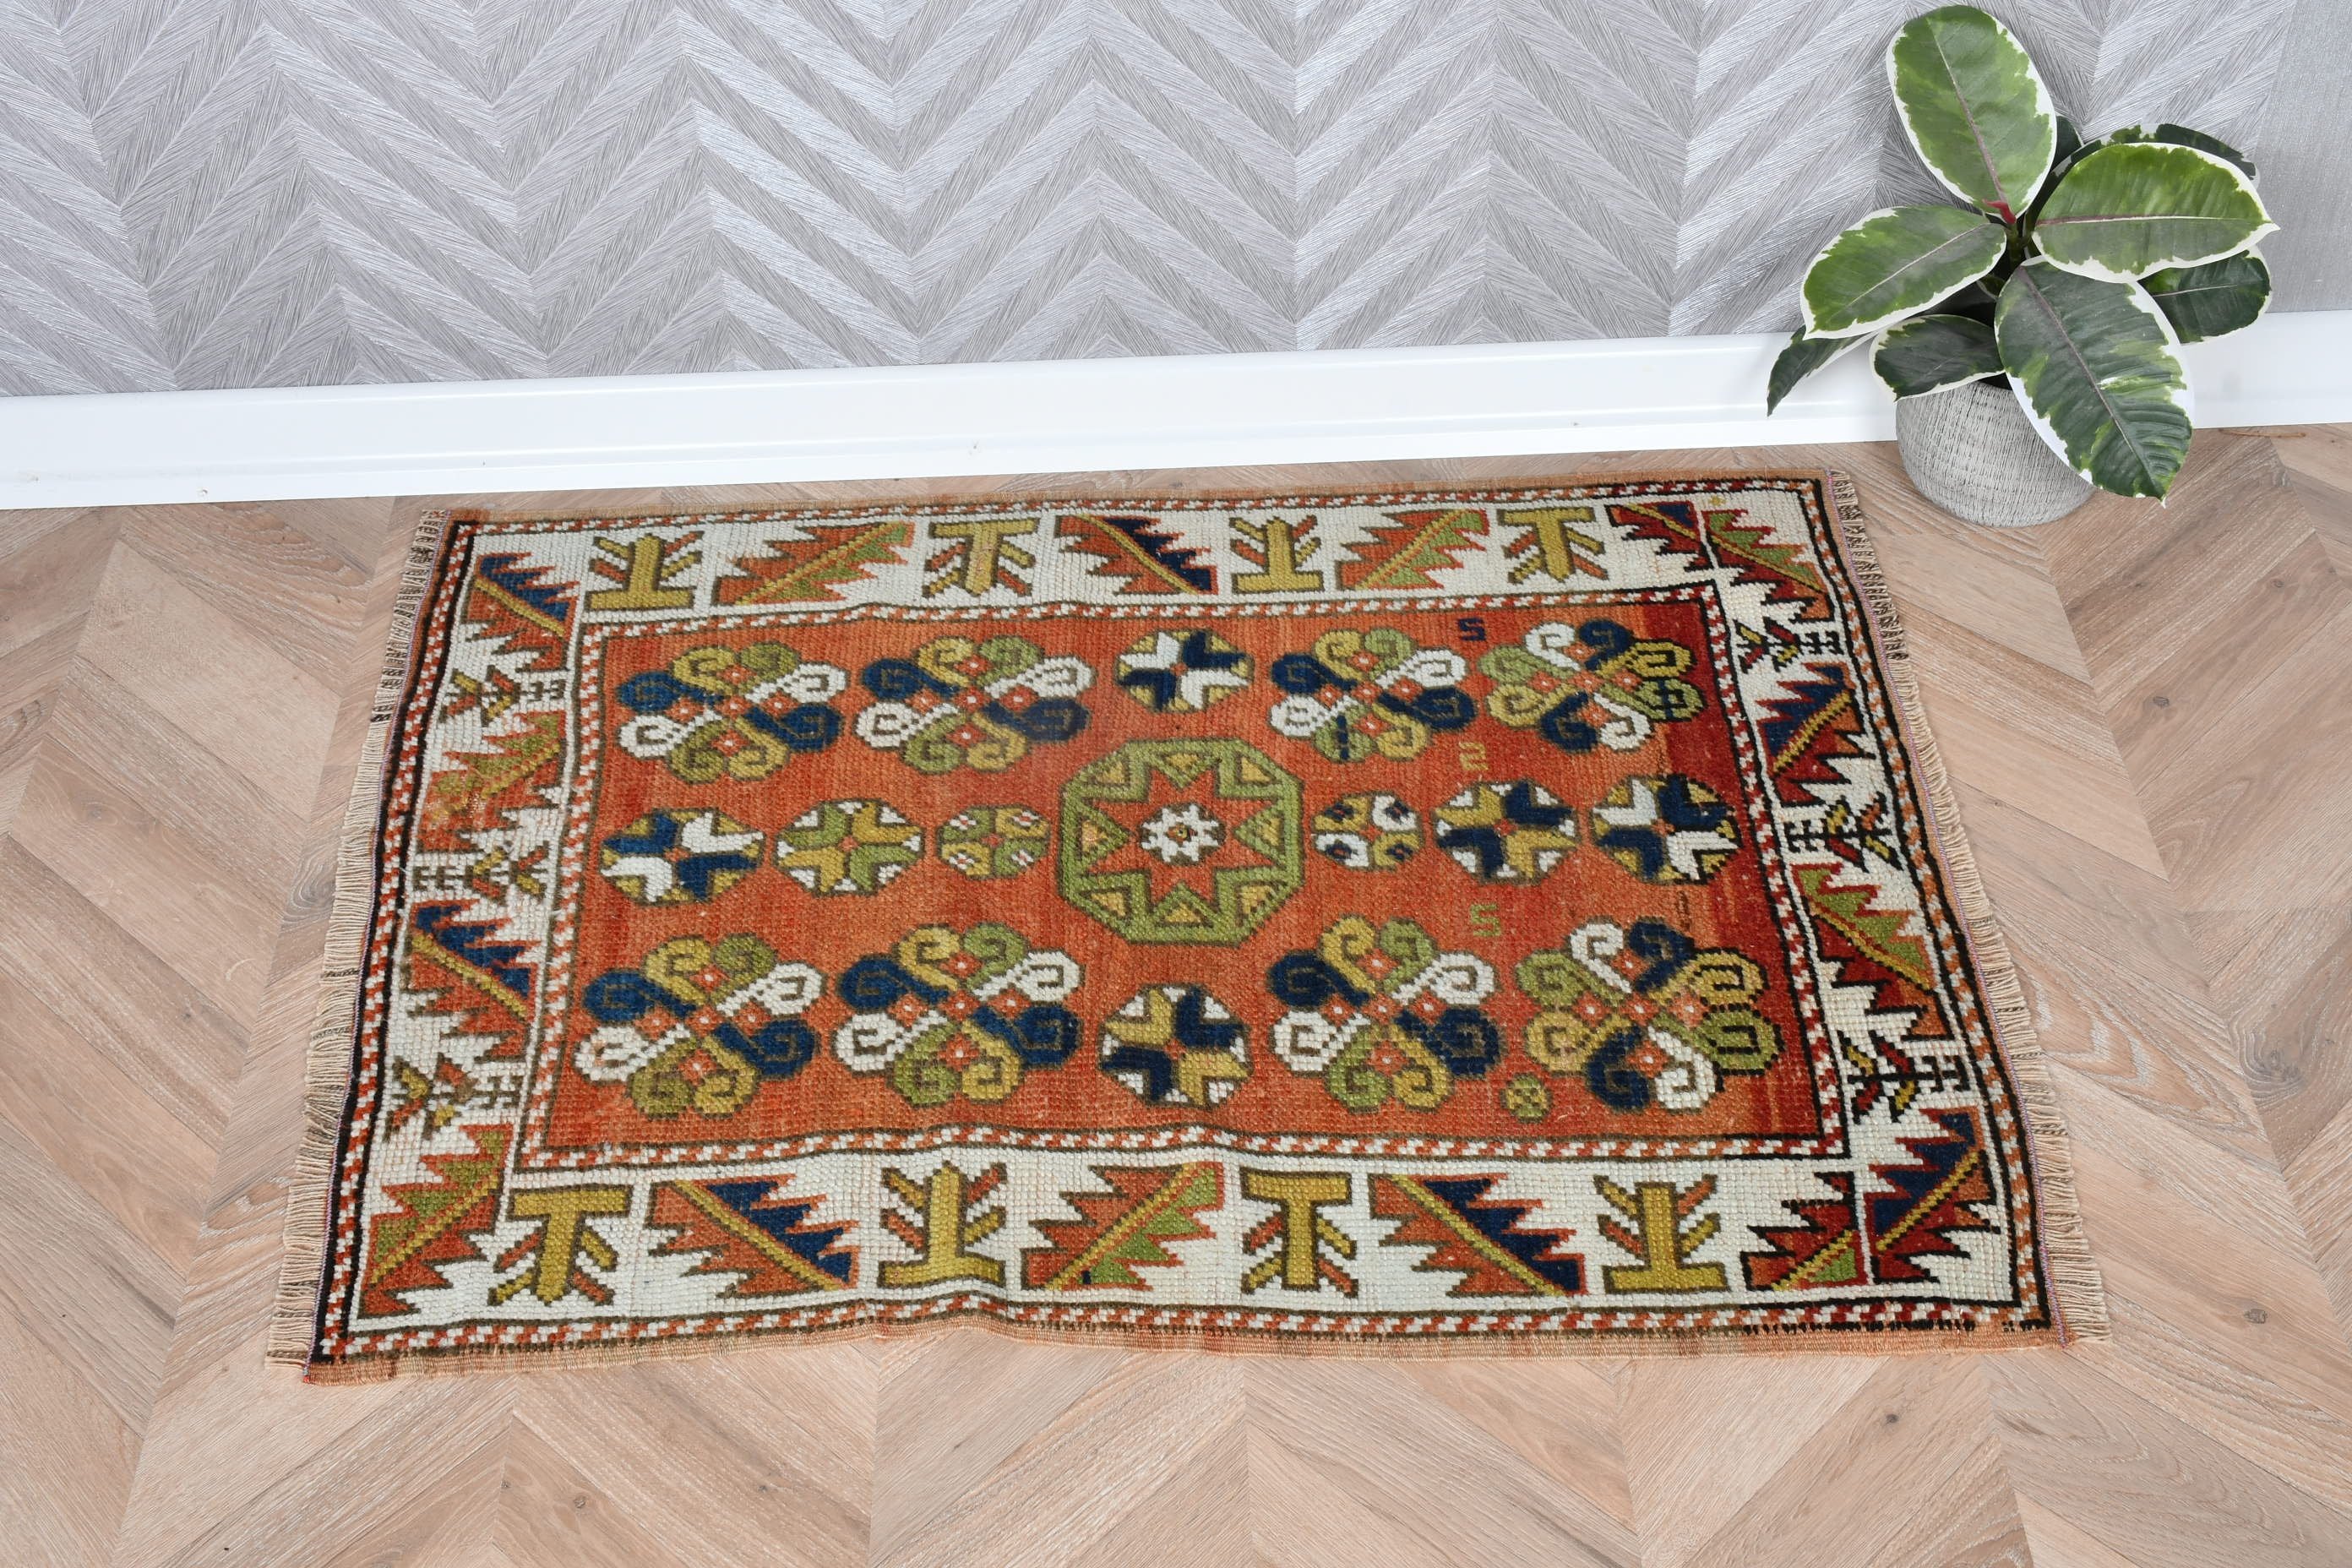 Kitchen Rugs, Cool Rug, Entry Rugs, Rugs for Entry, Turkish Rug, Nursery Rug, 2.4x3.2 ft Small Rugs, Brown Antique Rug, Vintage Rugs